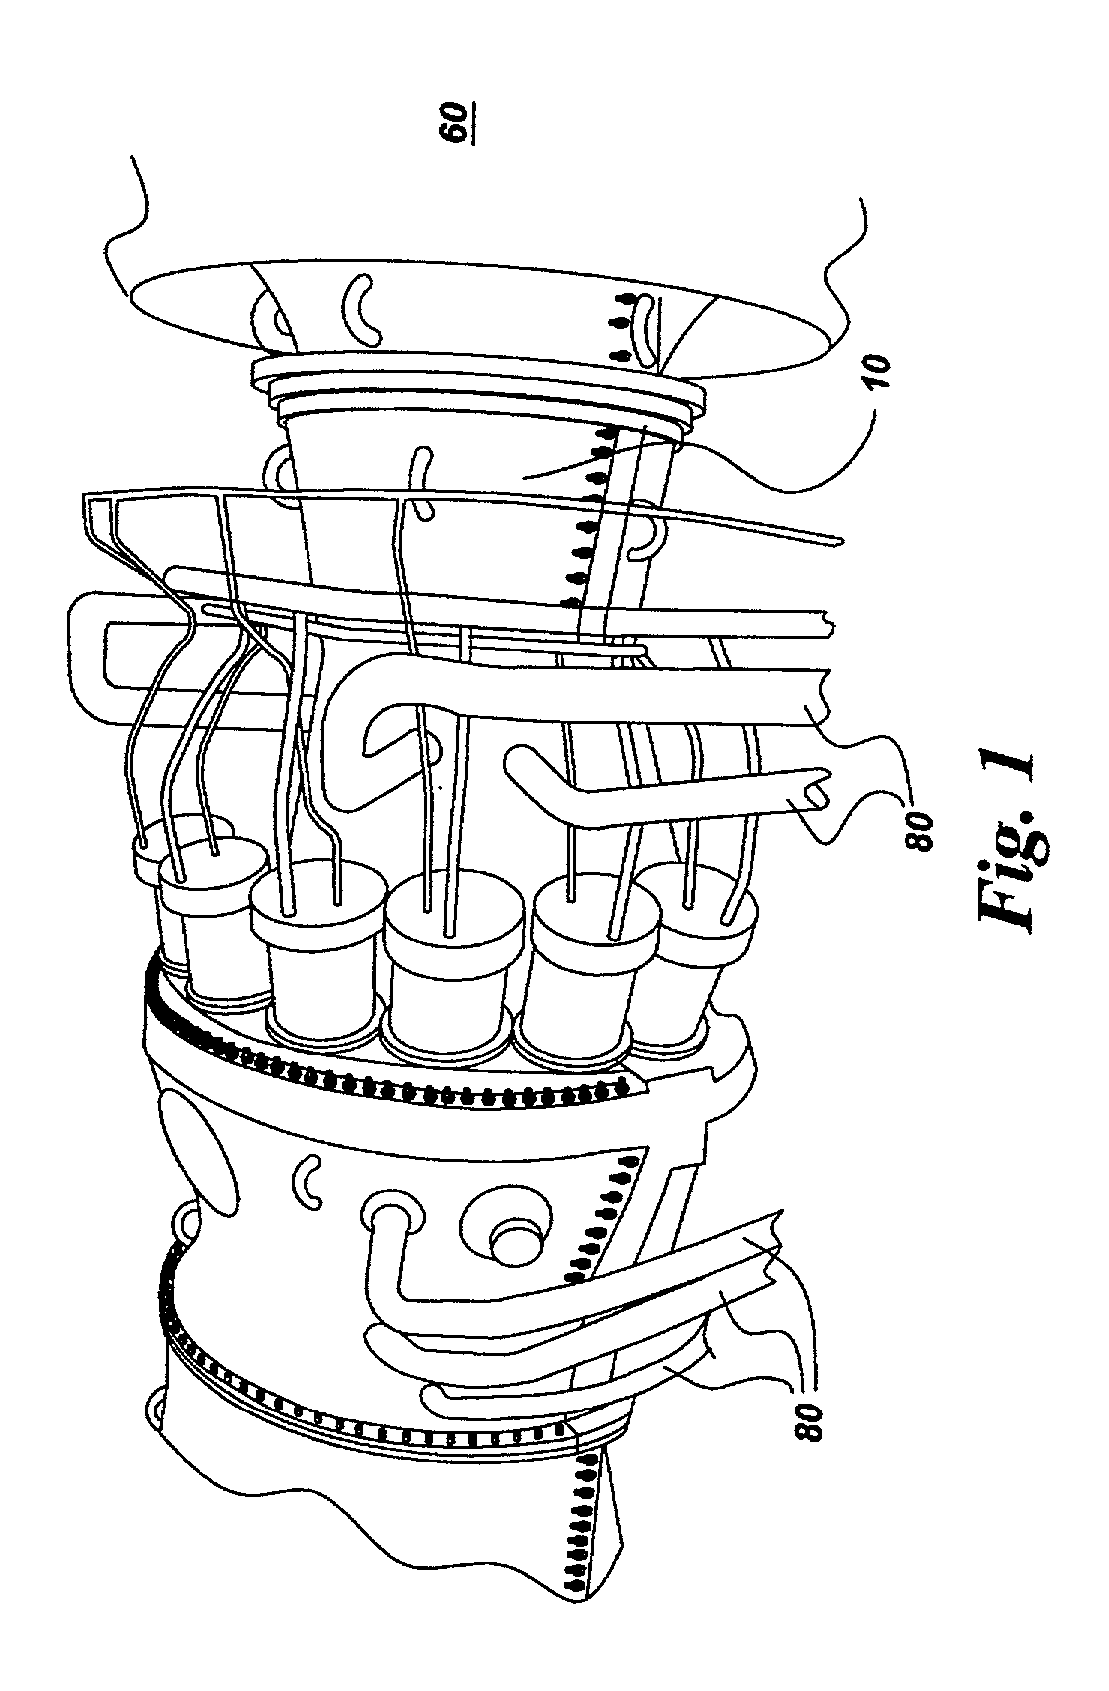 Method and system for controlling distortion of turbine case due to thermal variations